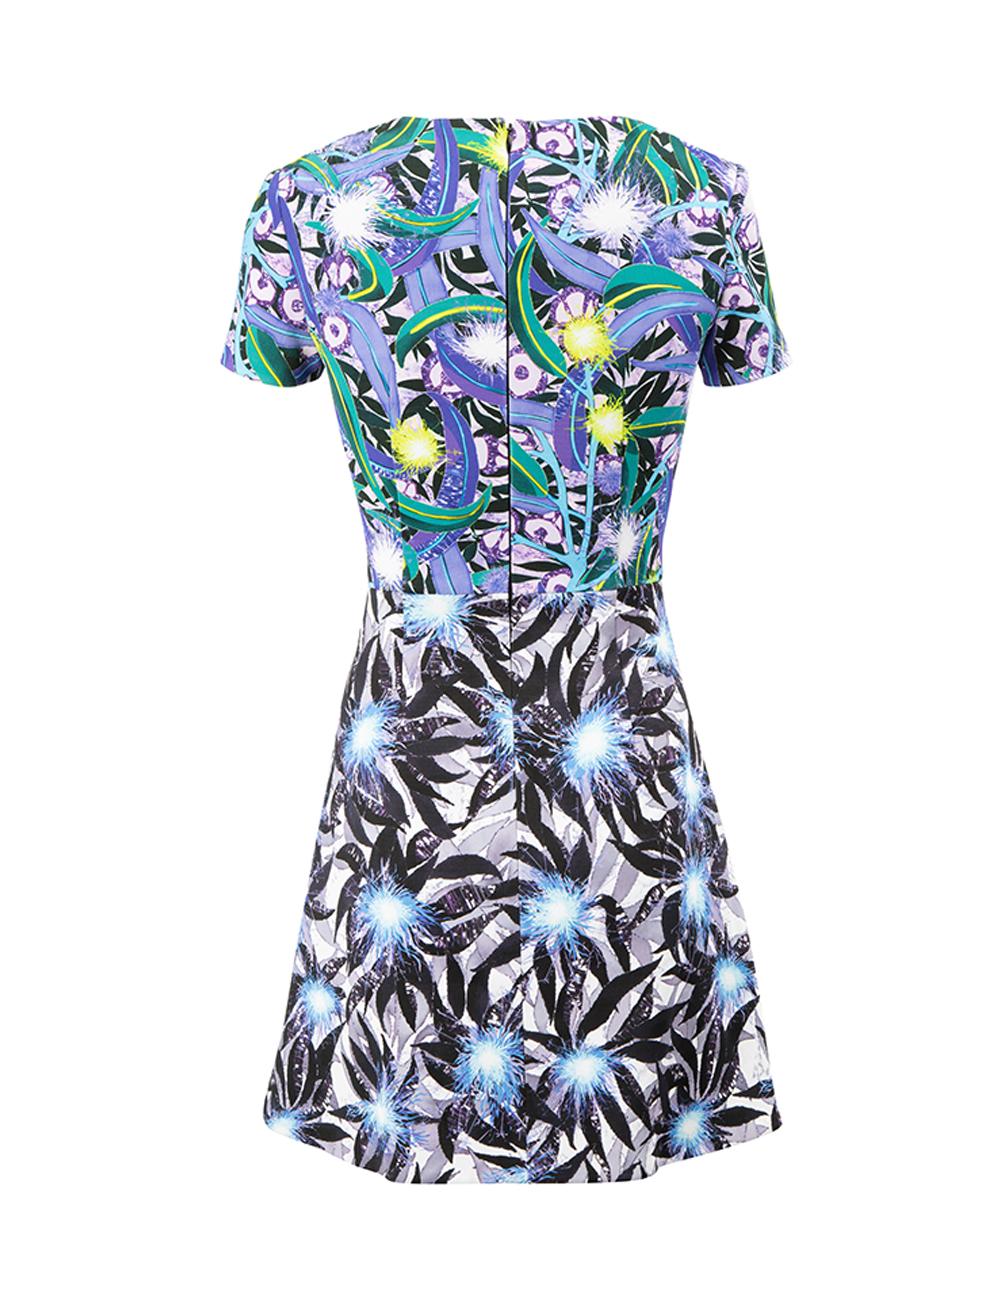 Peter Pilotto Women's Abstract Print Pattern Mini Dress In Good Condition For Sale In London, GB